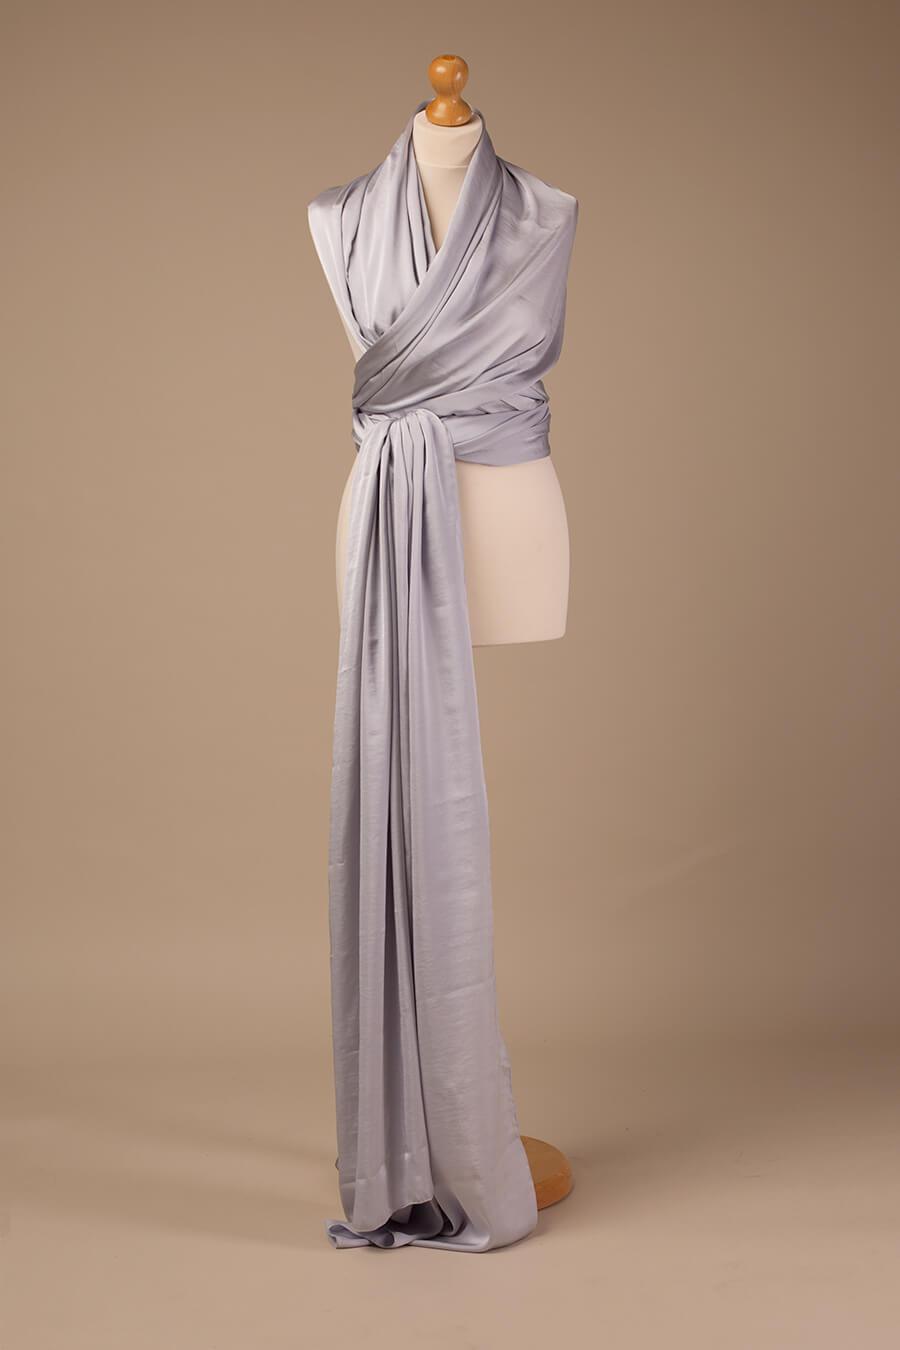 This is a product photo of the silky scarf cool grey. The scarf is hanging on a mannequin.